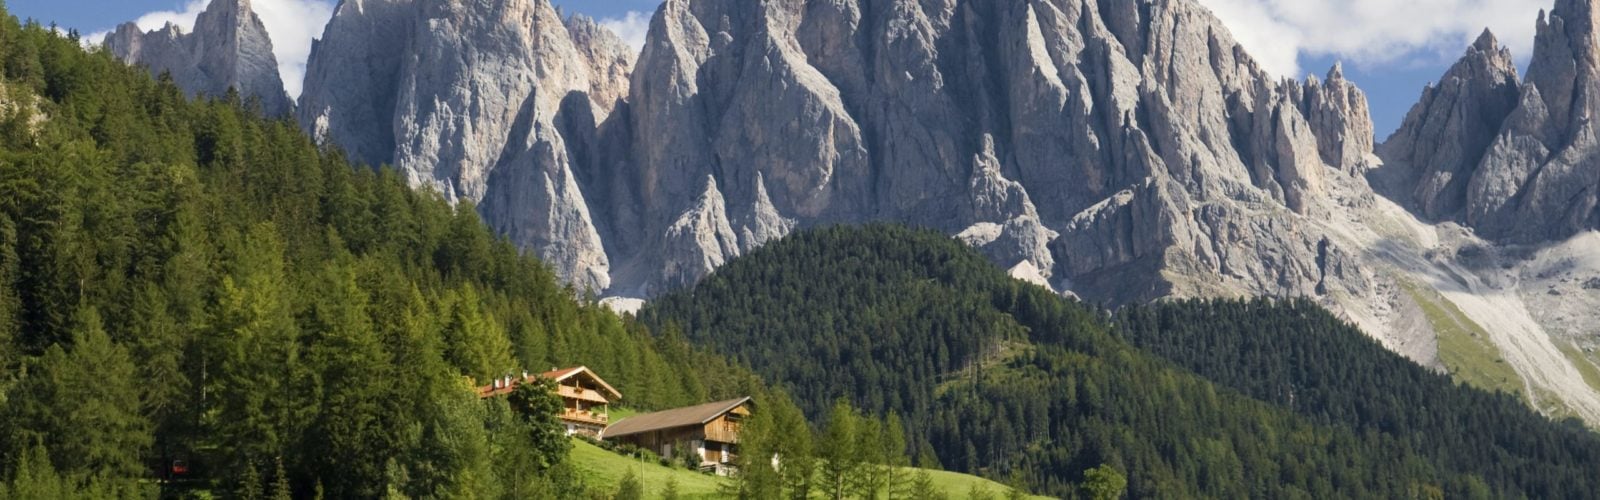 Thick forest and Dolomites peaks on a summer's day, Italy